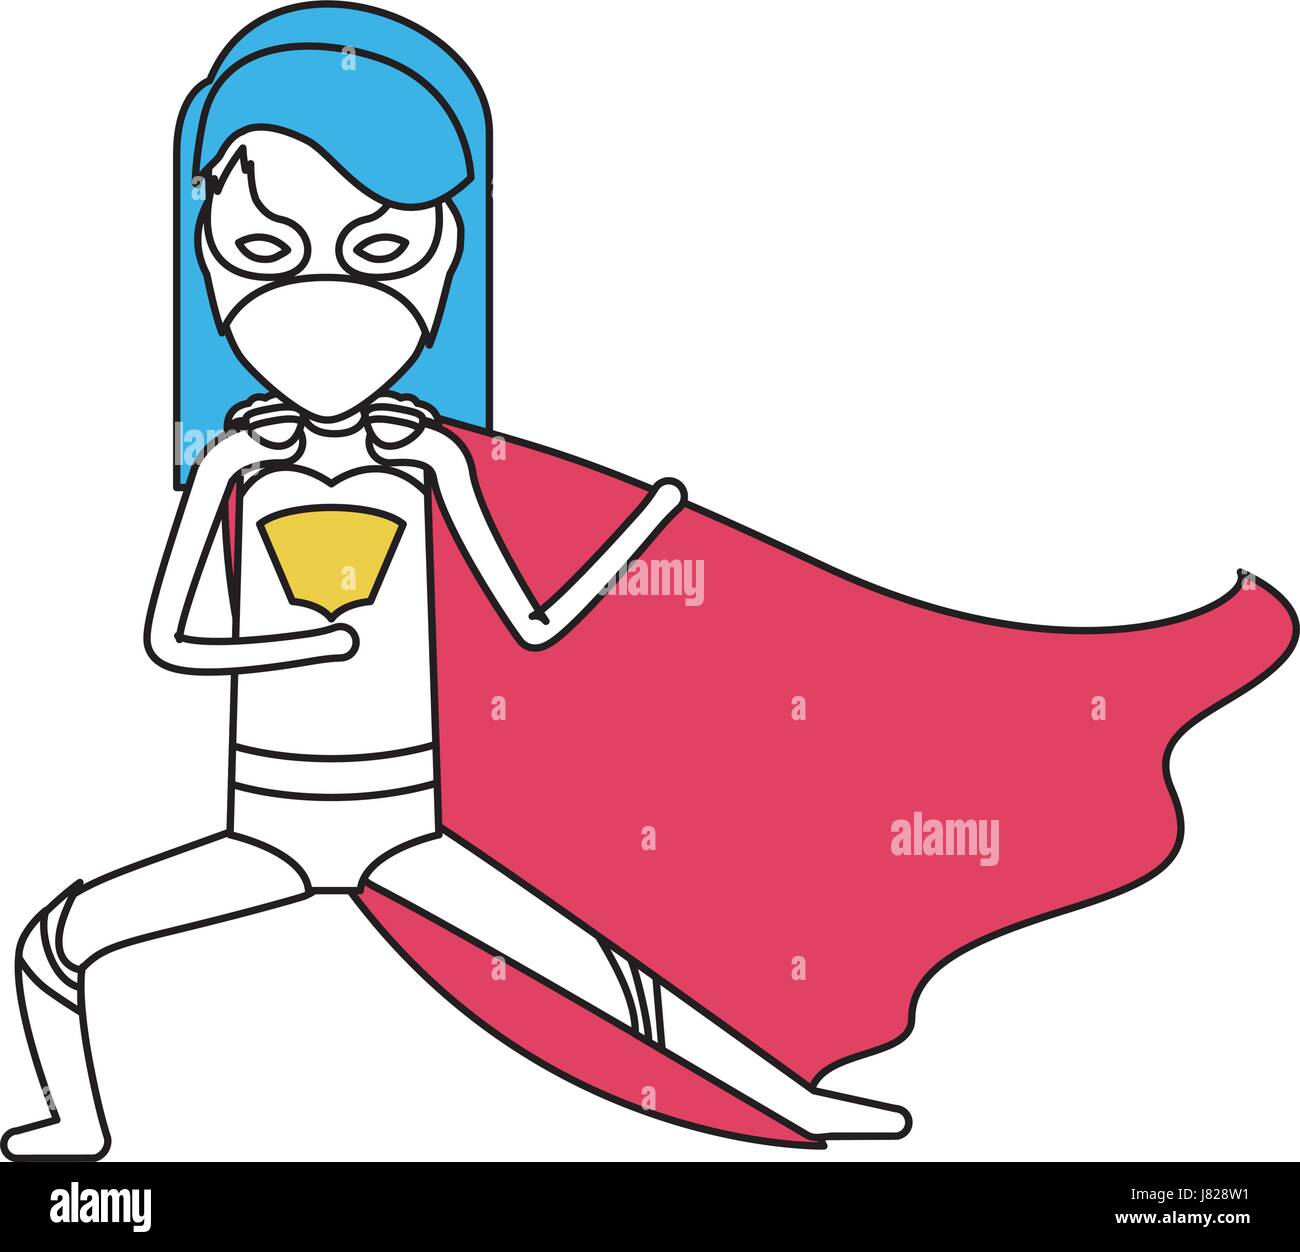 Comic Superwoman Actions in Different Poses. Female Superhero Vector  Cartoon Characters Stock Vector - Illustration of mascot, body: 110125336